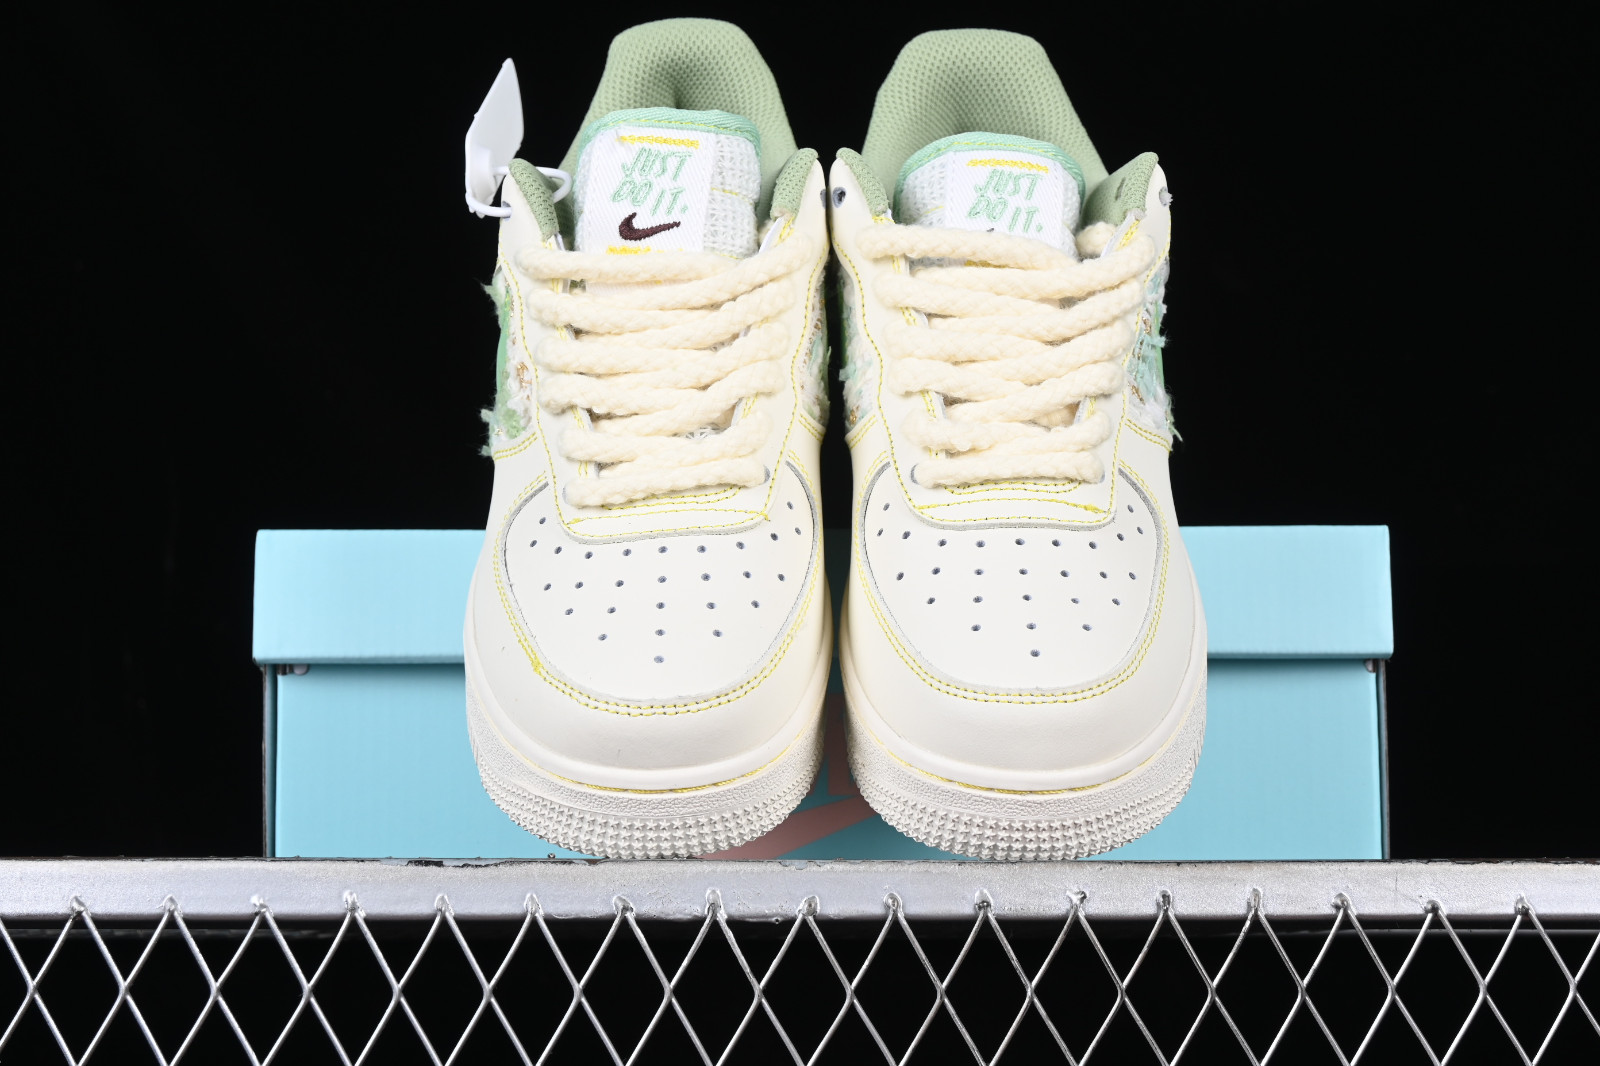 Ariss-euShops - Nike Air Force 1 07 Just Do It Off White Green Yellow FJ7740 - 011 - Nike Dunk Low GS